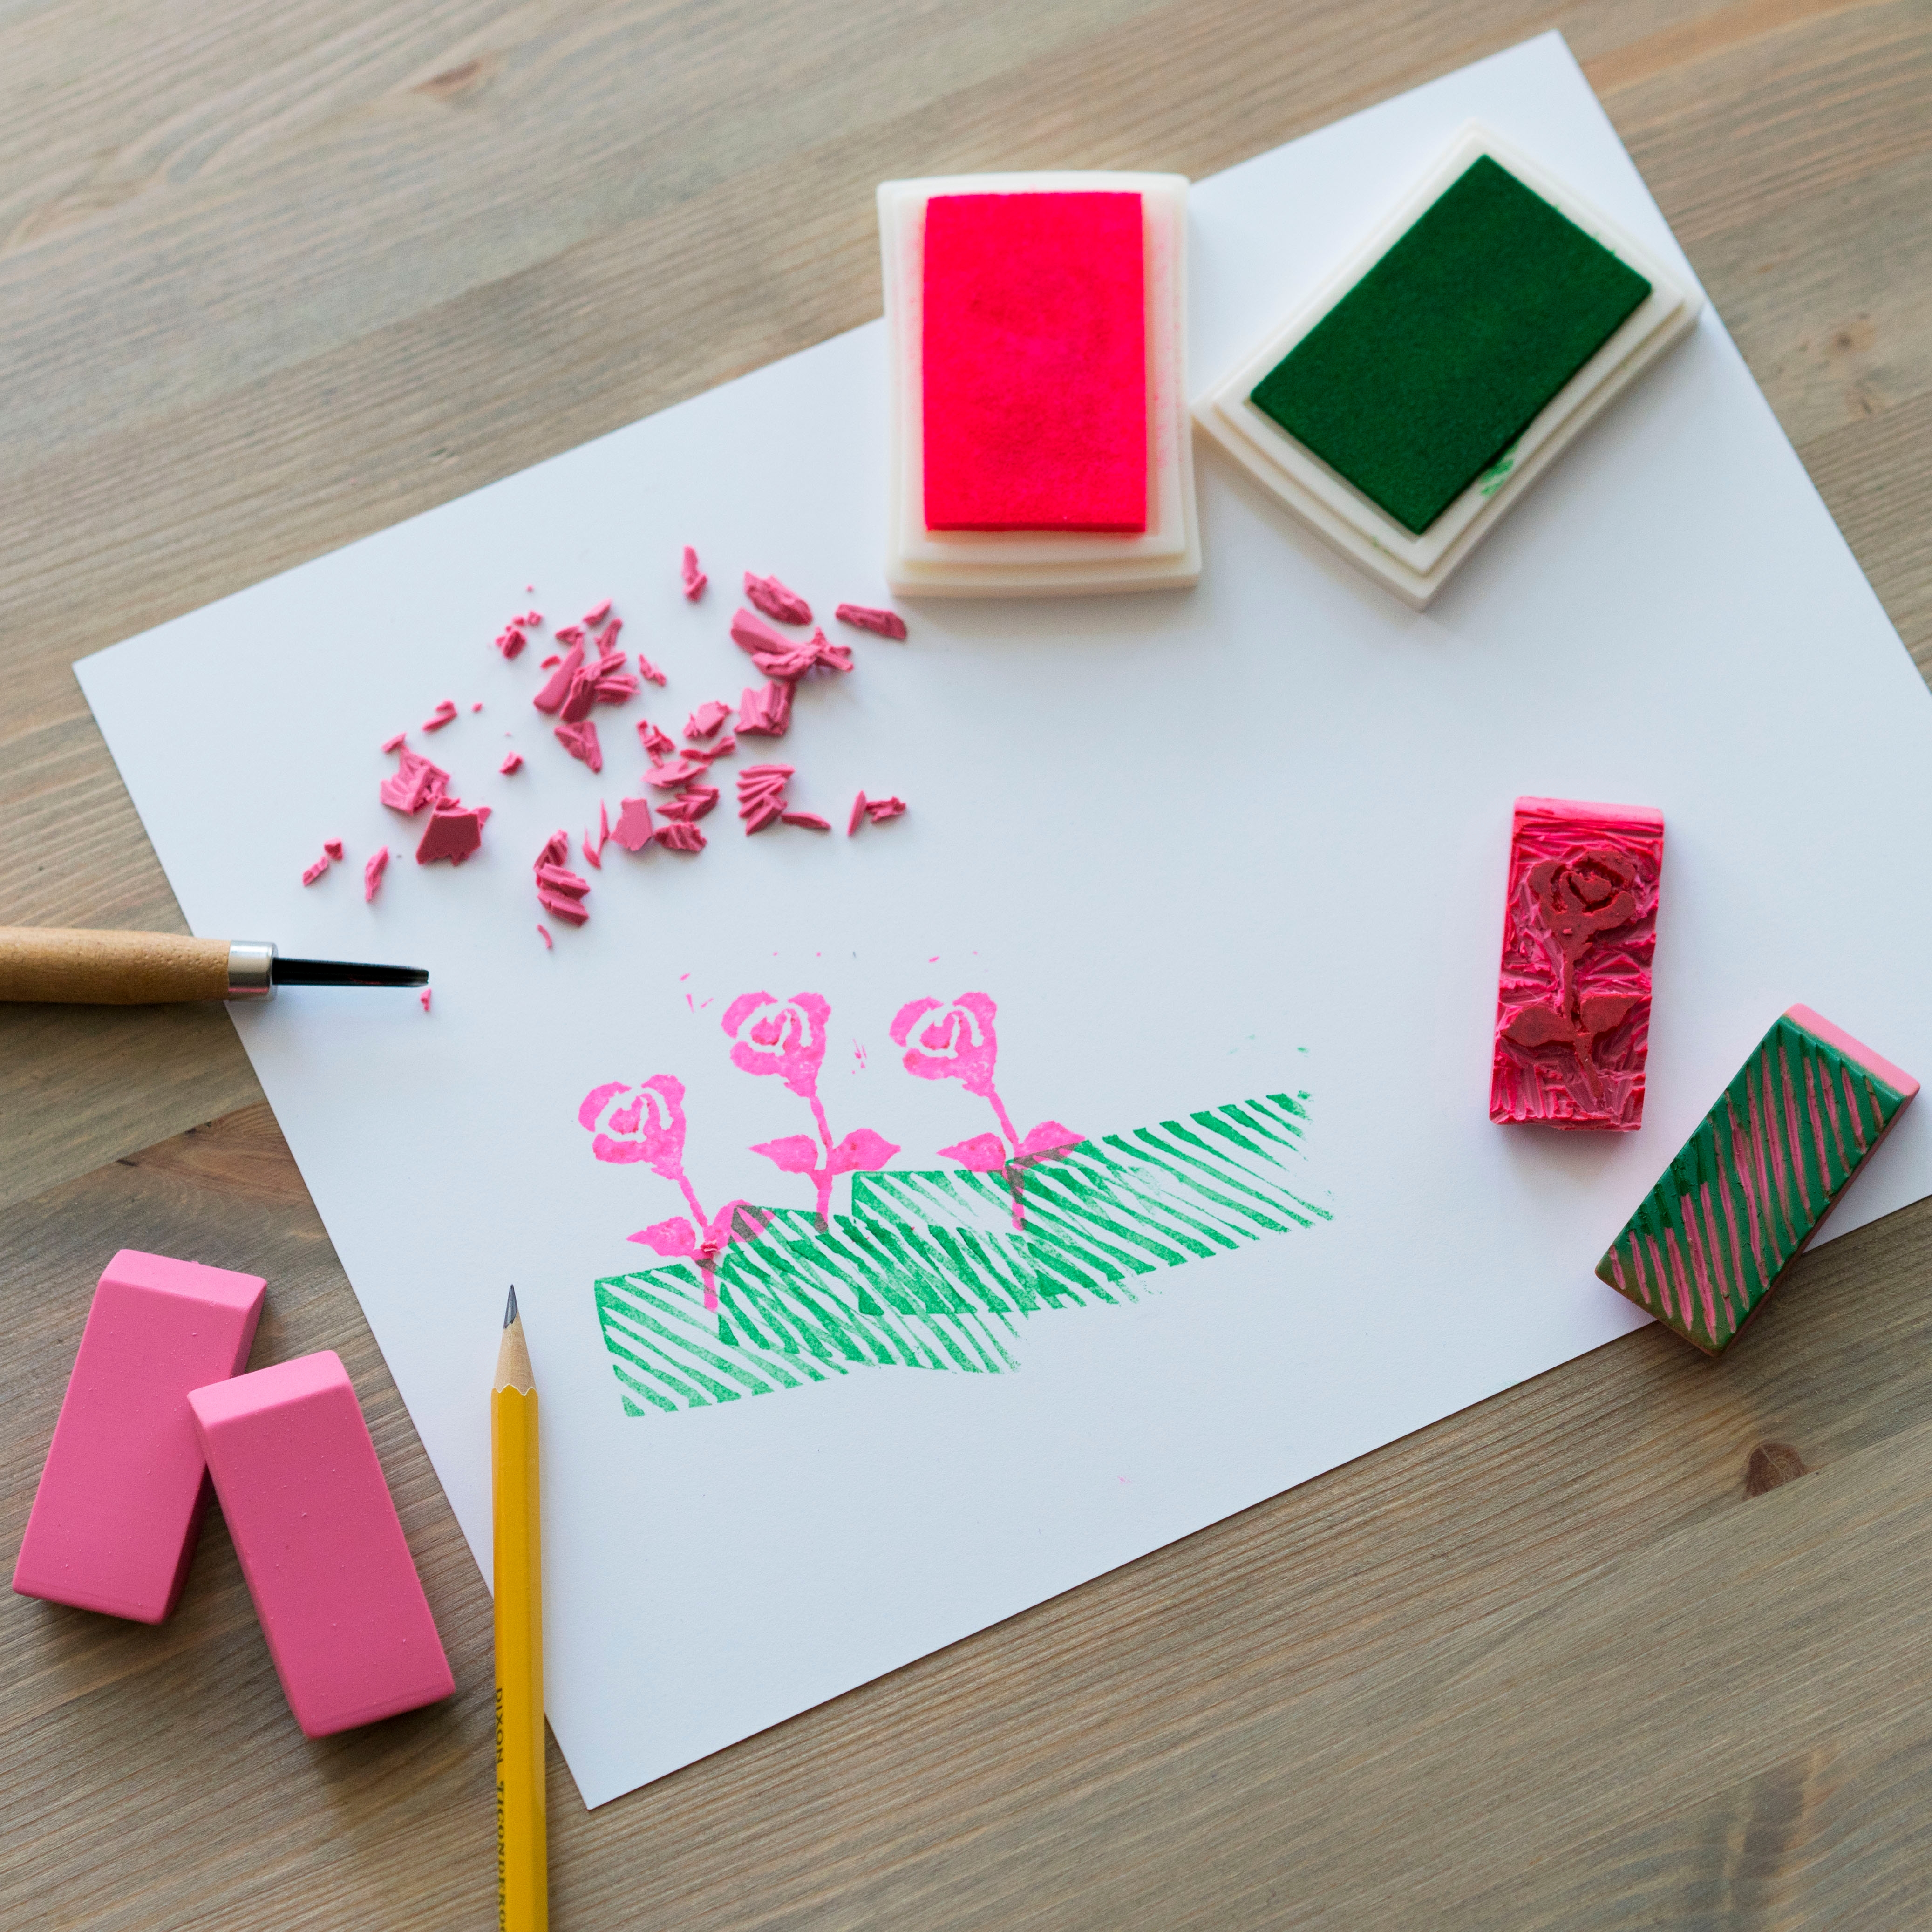 How To Make Fun and Easy DIY Pasta Stamps - Hands On As We Grow®